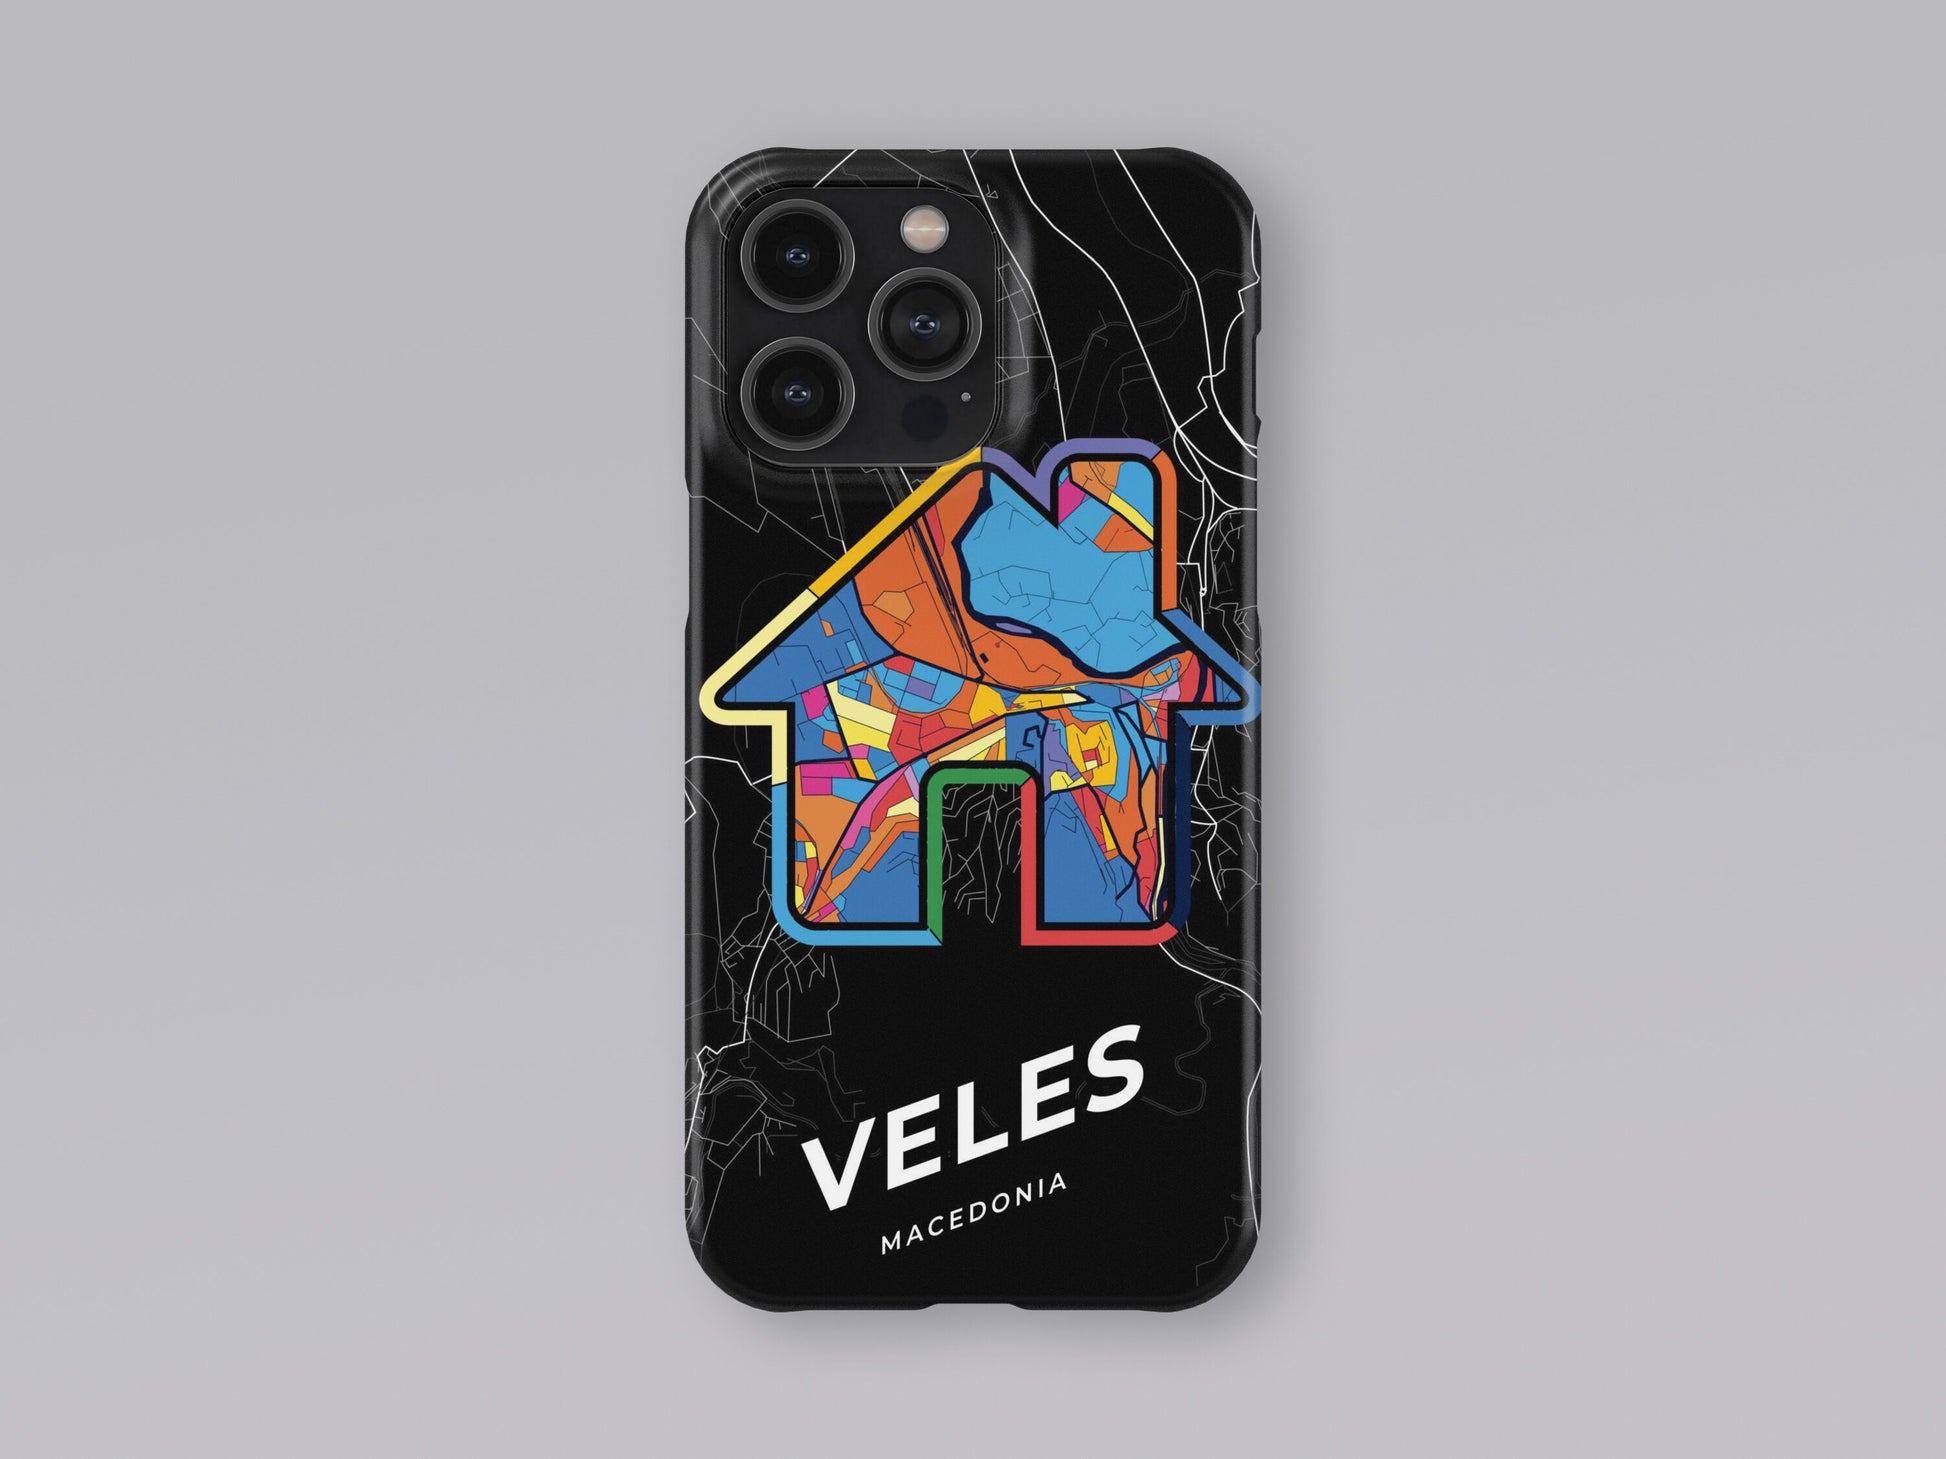 Veles North Macedonia slim phone case with colorful icon 3